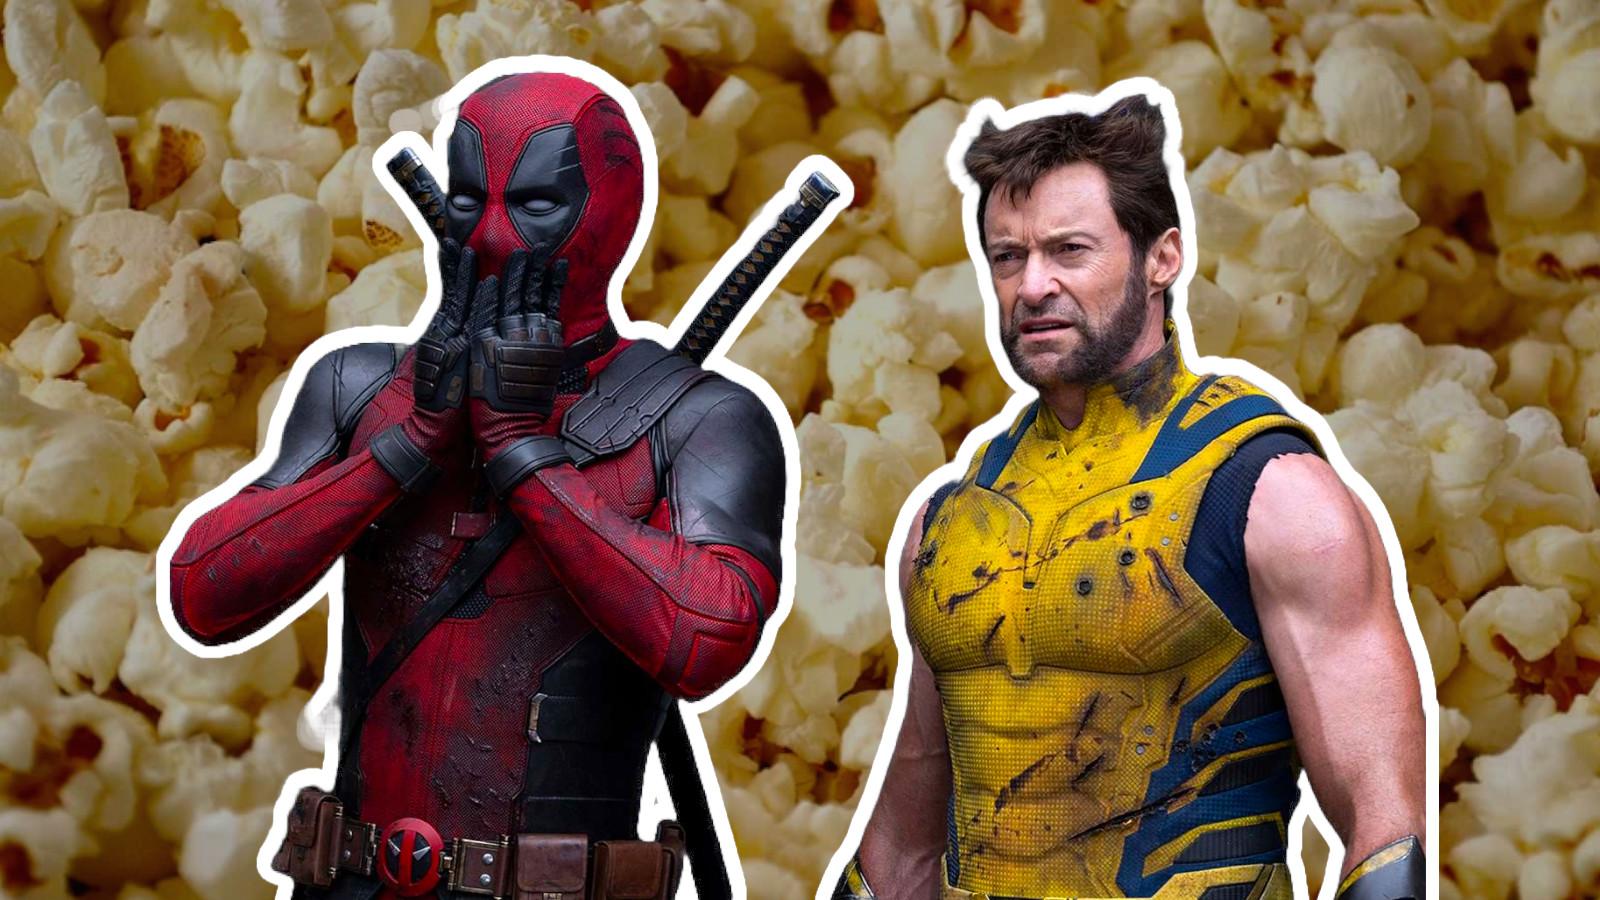 Deadpool & Wolverine with lots of popcorn